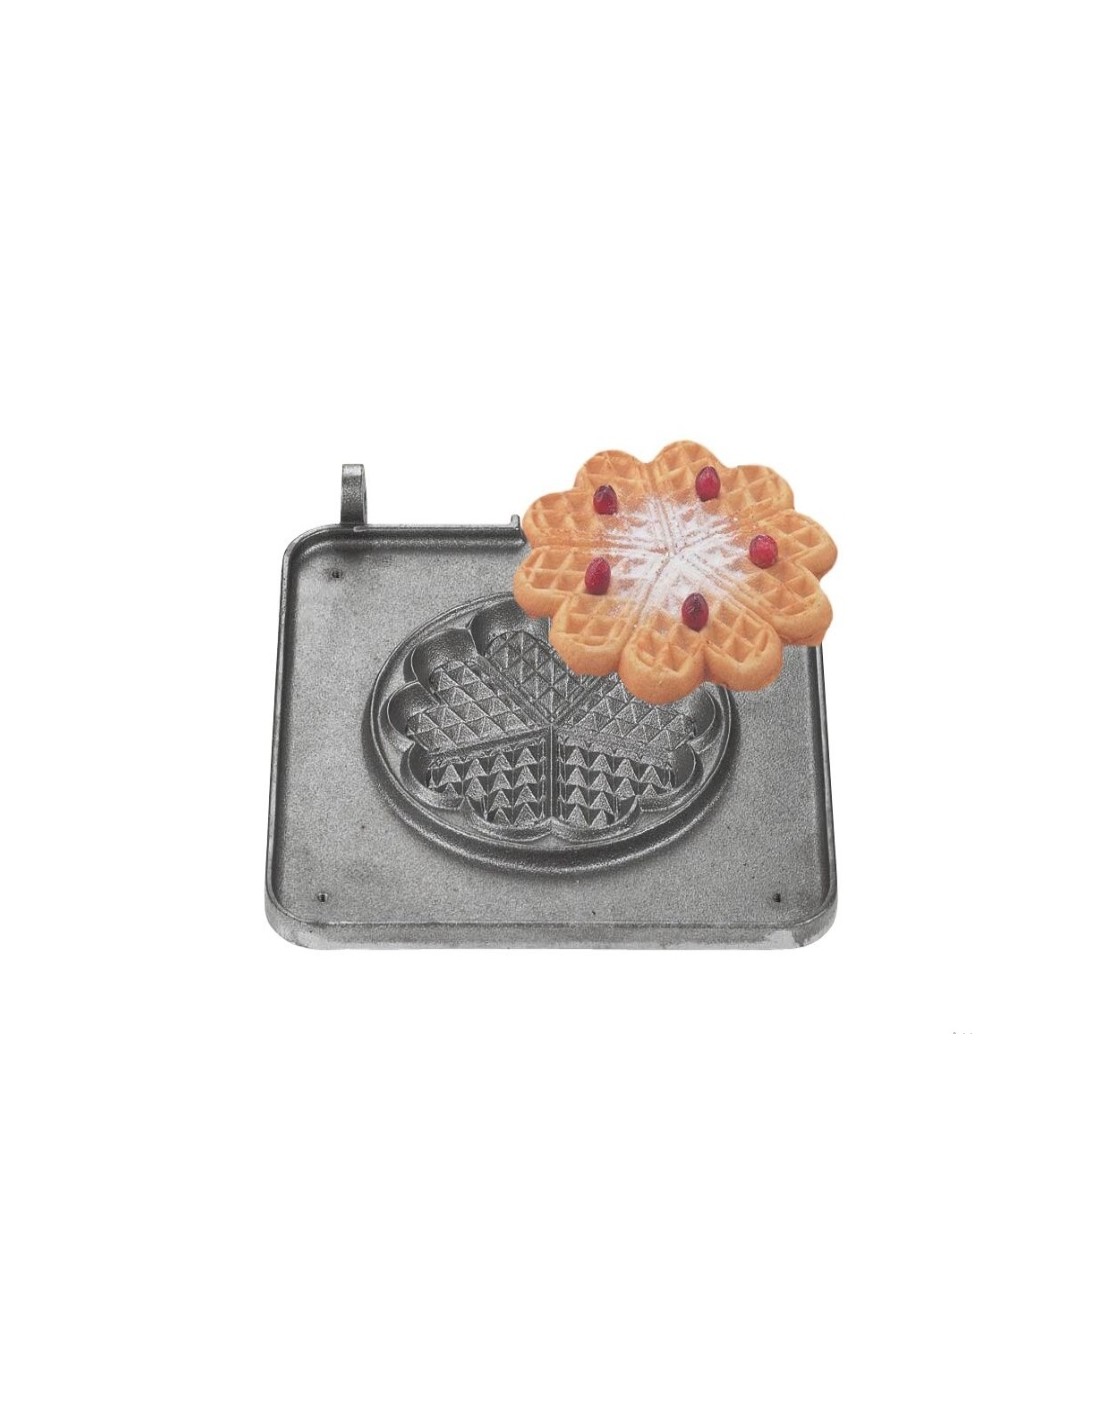 Interchangeable waffel plate - SHAPE: 1 heart waffle ÃƒÂ¸ 15 x 1 cm - Can be divided into 5 pieces - cast iron